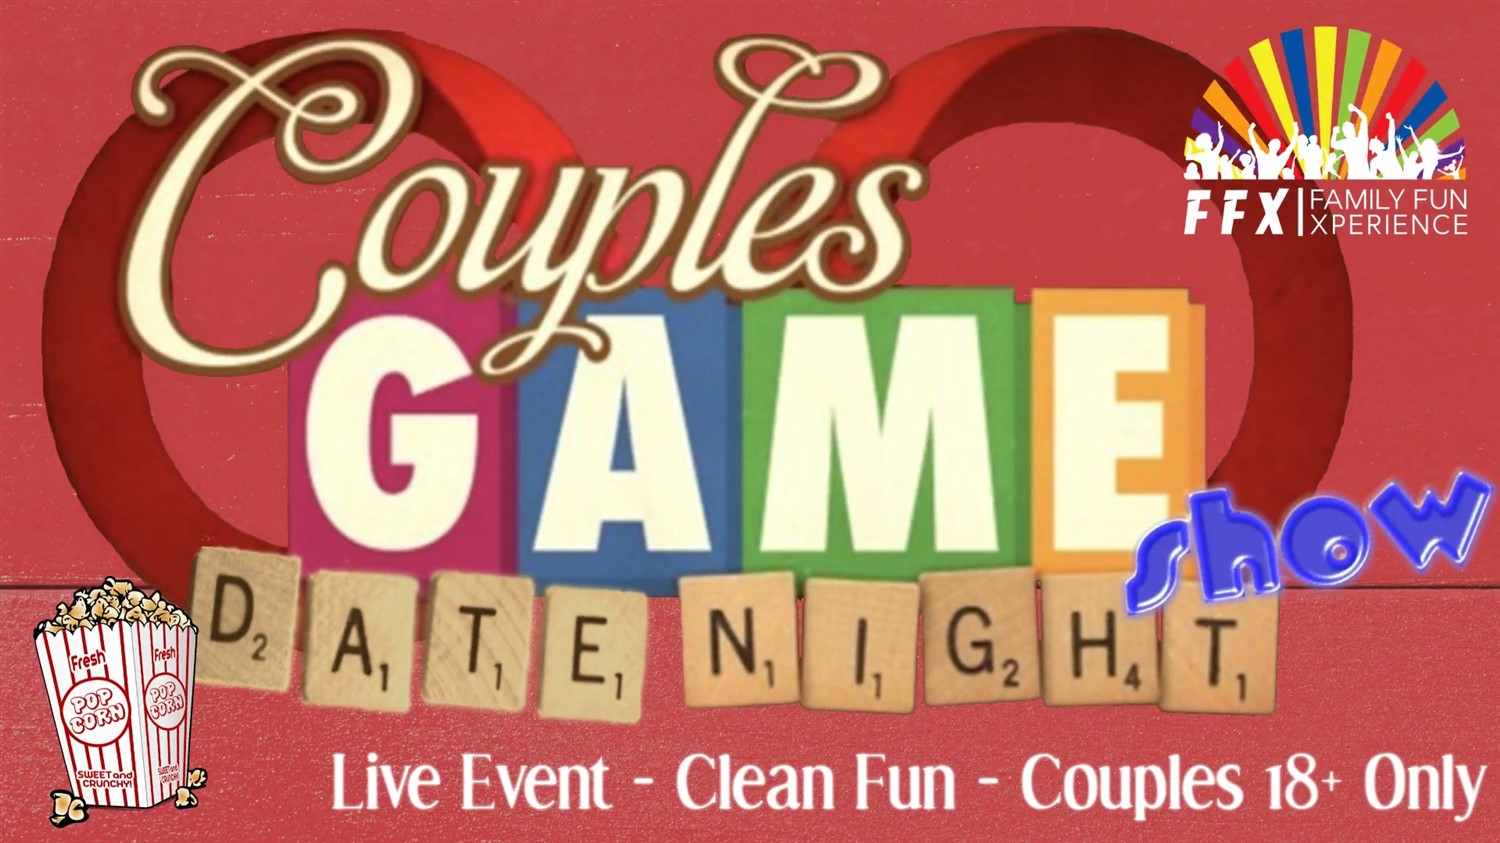 Couples Date Night Game Show! Live Game Show - Couples Only - Date Night FUN! on Jul 21, 19:00@FFX Theatre - Pick a seat, Buy tickets and Get information on Family Fun Xperience tickets.ffxshow.org